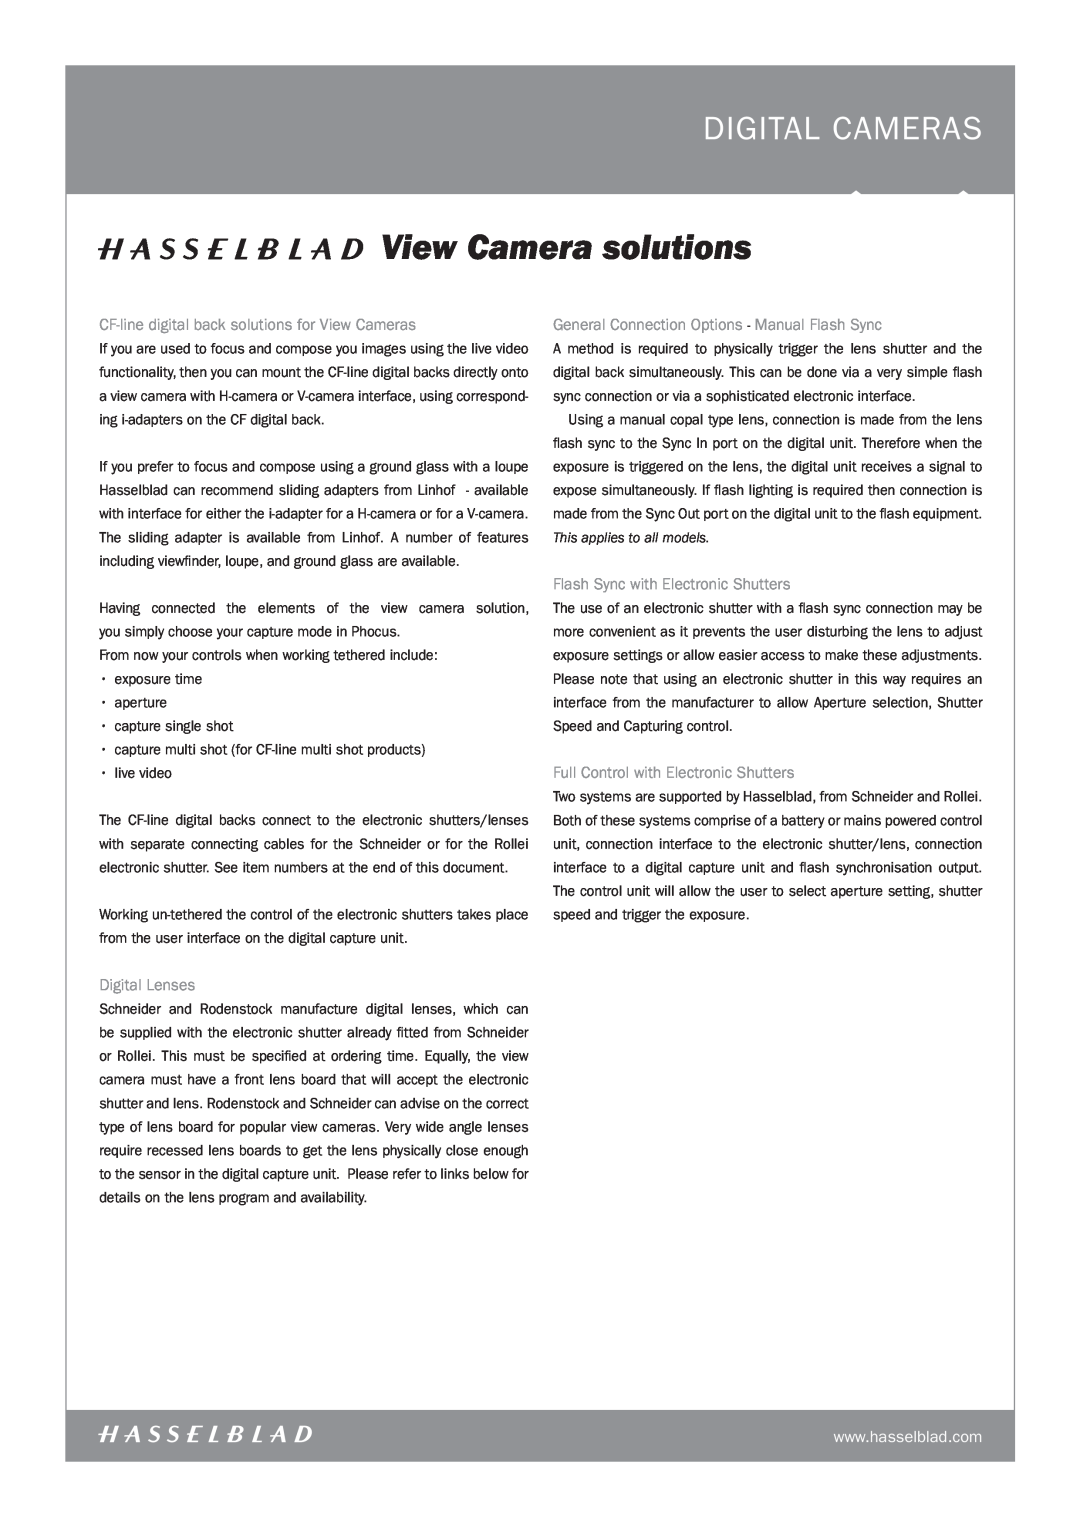 Hasselblad CF-MS, H3DII CF-line digital back solutions for View Cameras, General Connection Options - Manual Flash Sync 